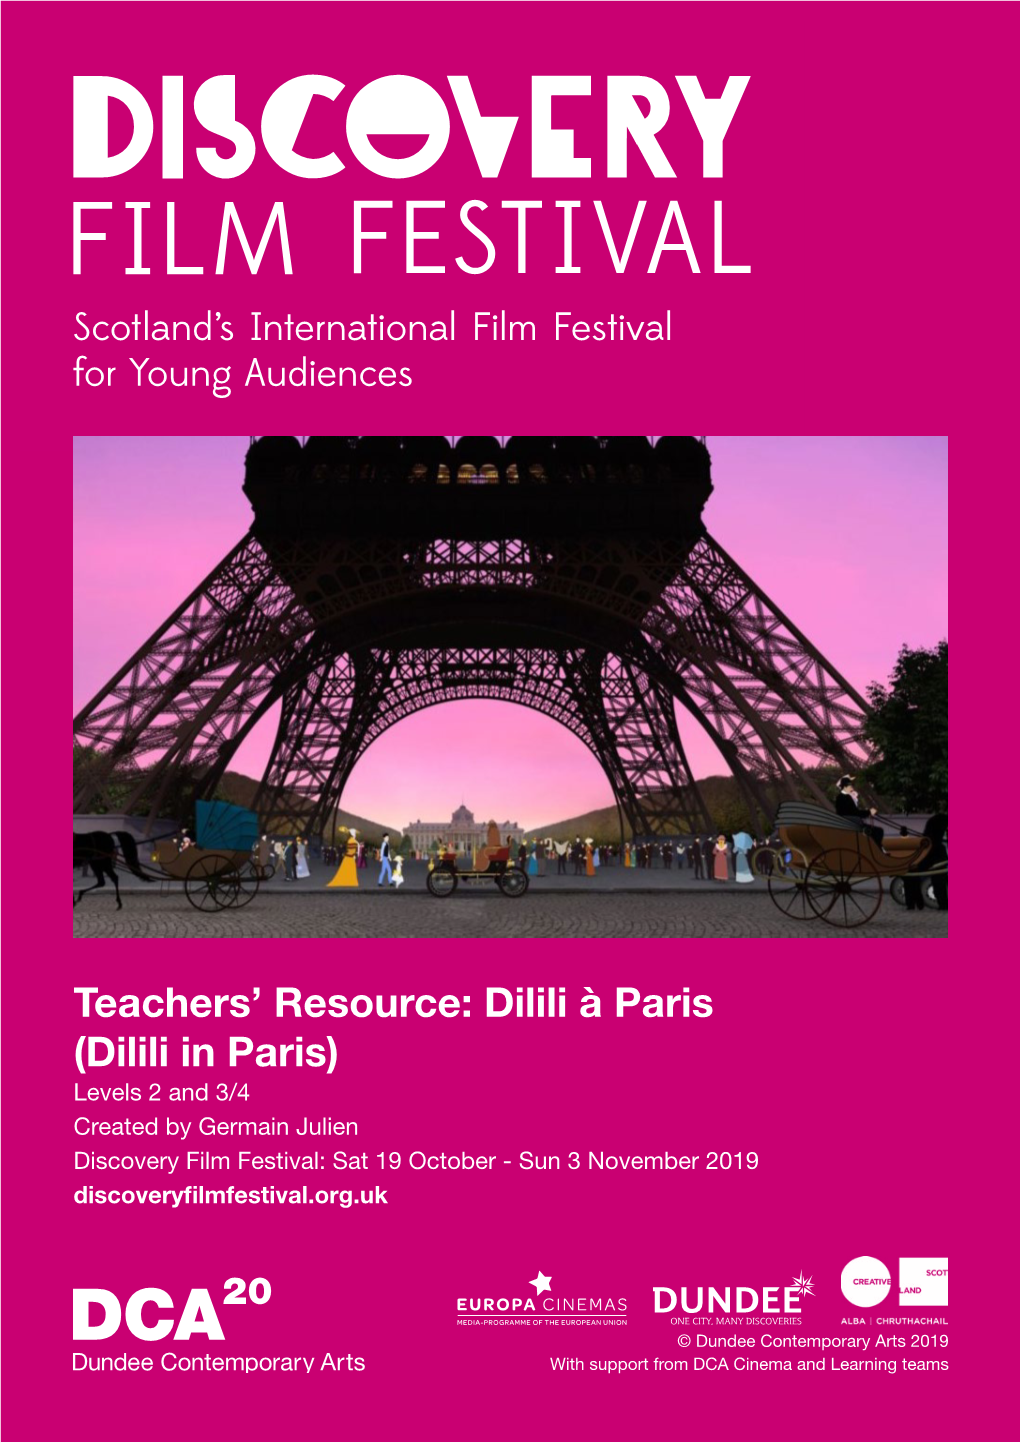 Dilili in Paris) Levels 2 and 3/4 Created by Germain Julien Discovery Film Festival: Sat 19 October - Sun 3 November 2019 Discoveryfilmfestival.Org.Uk